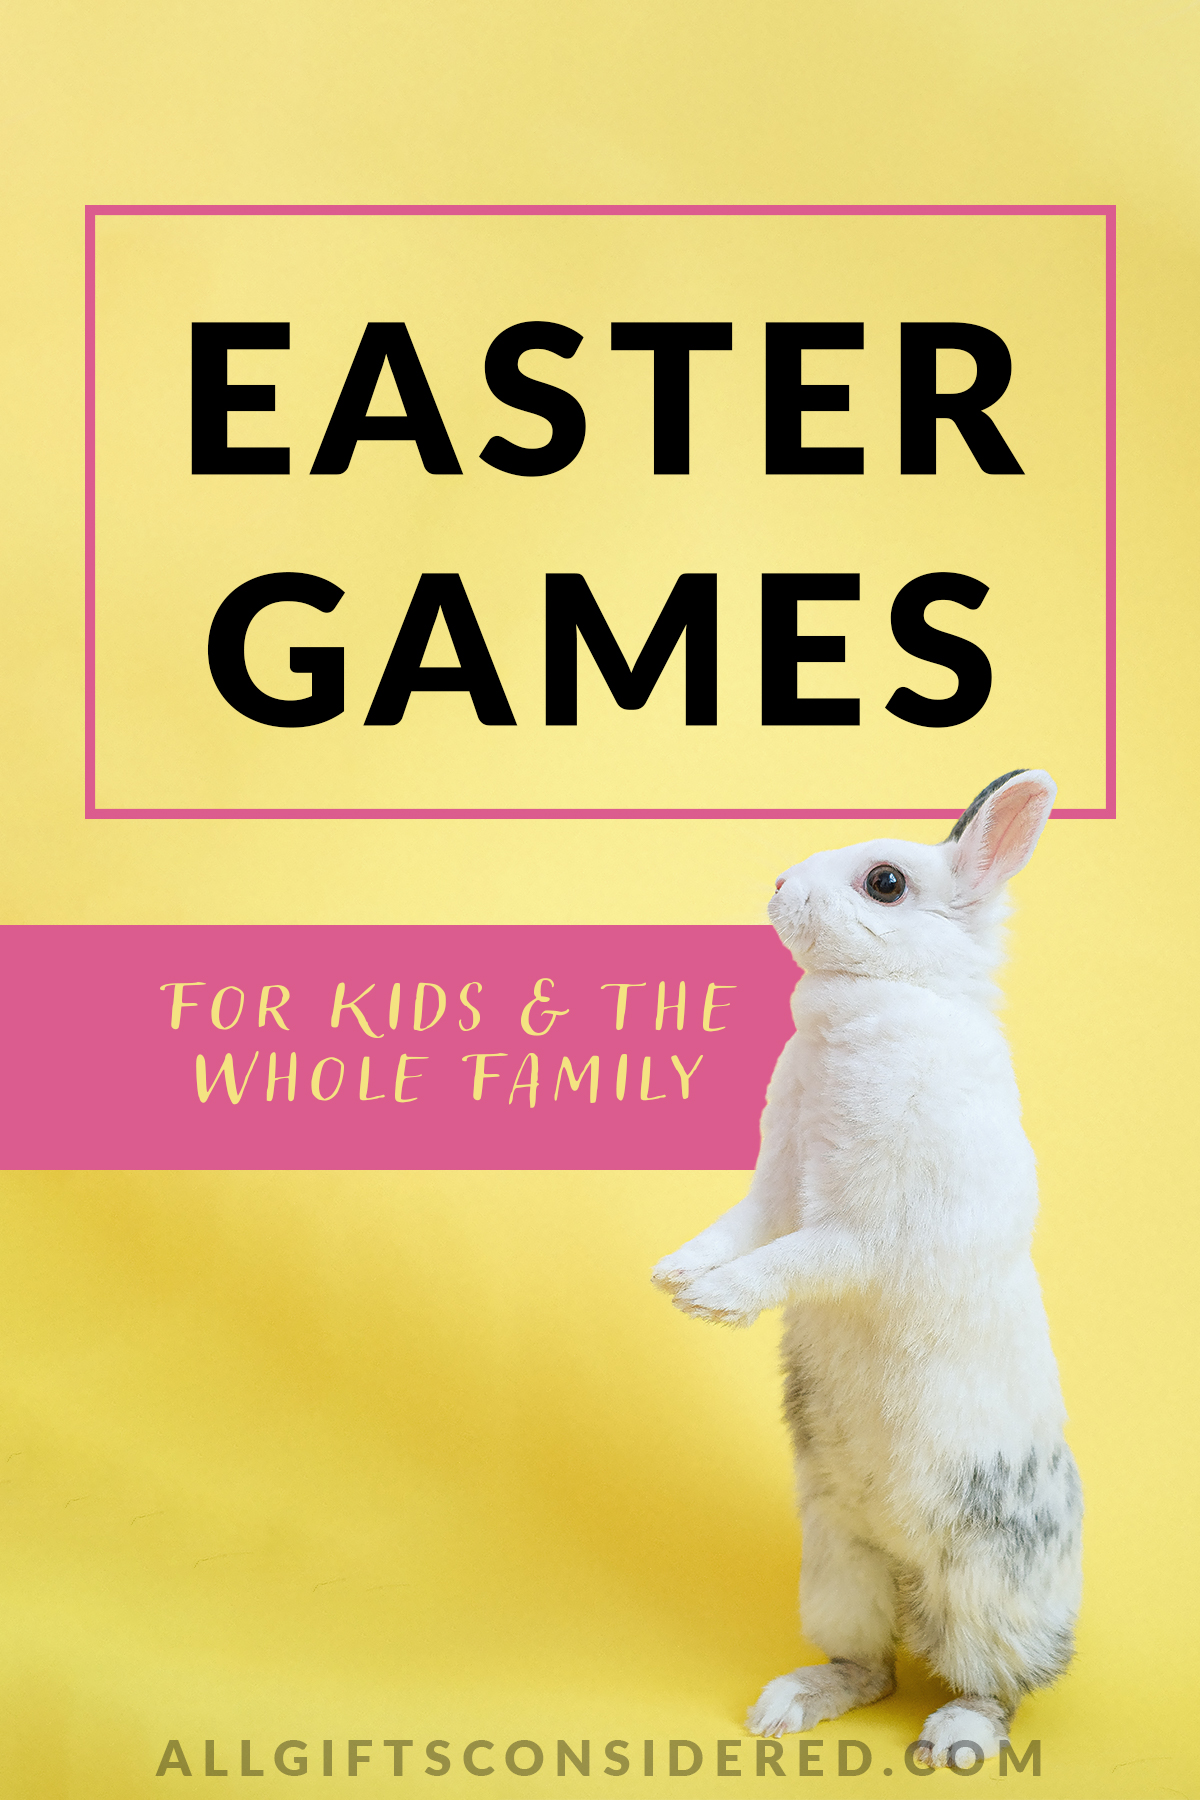 40-best-easter-games-for-kids-the-whole-family-all-gifts-considered